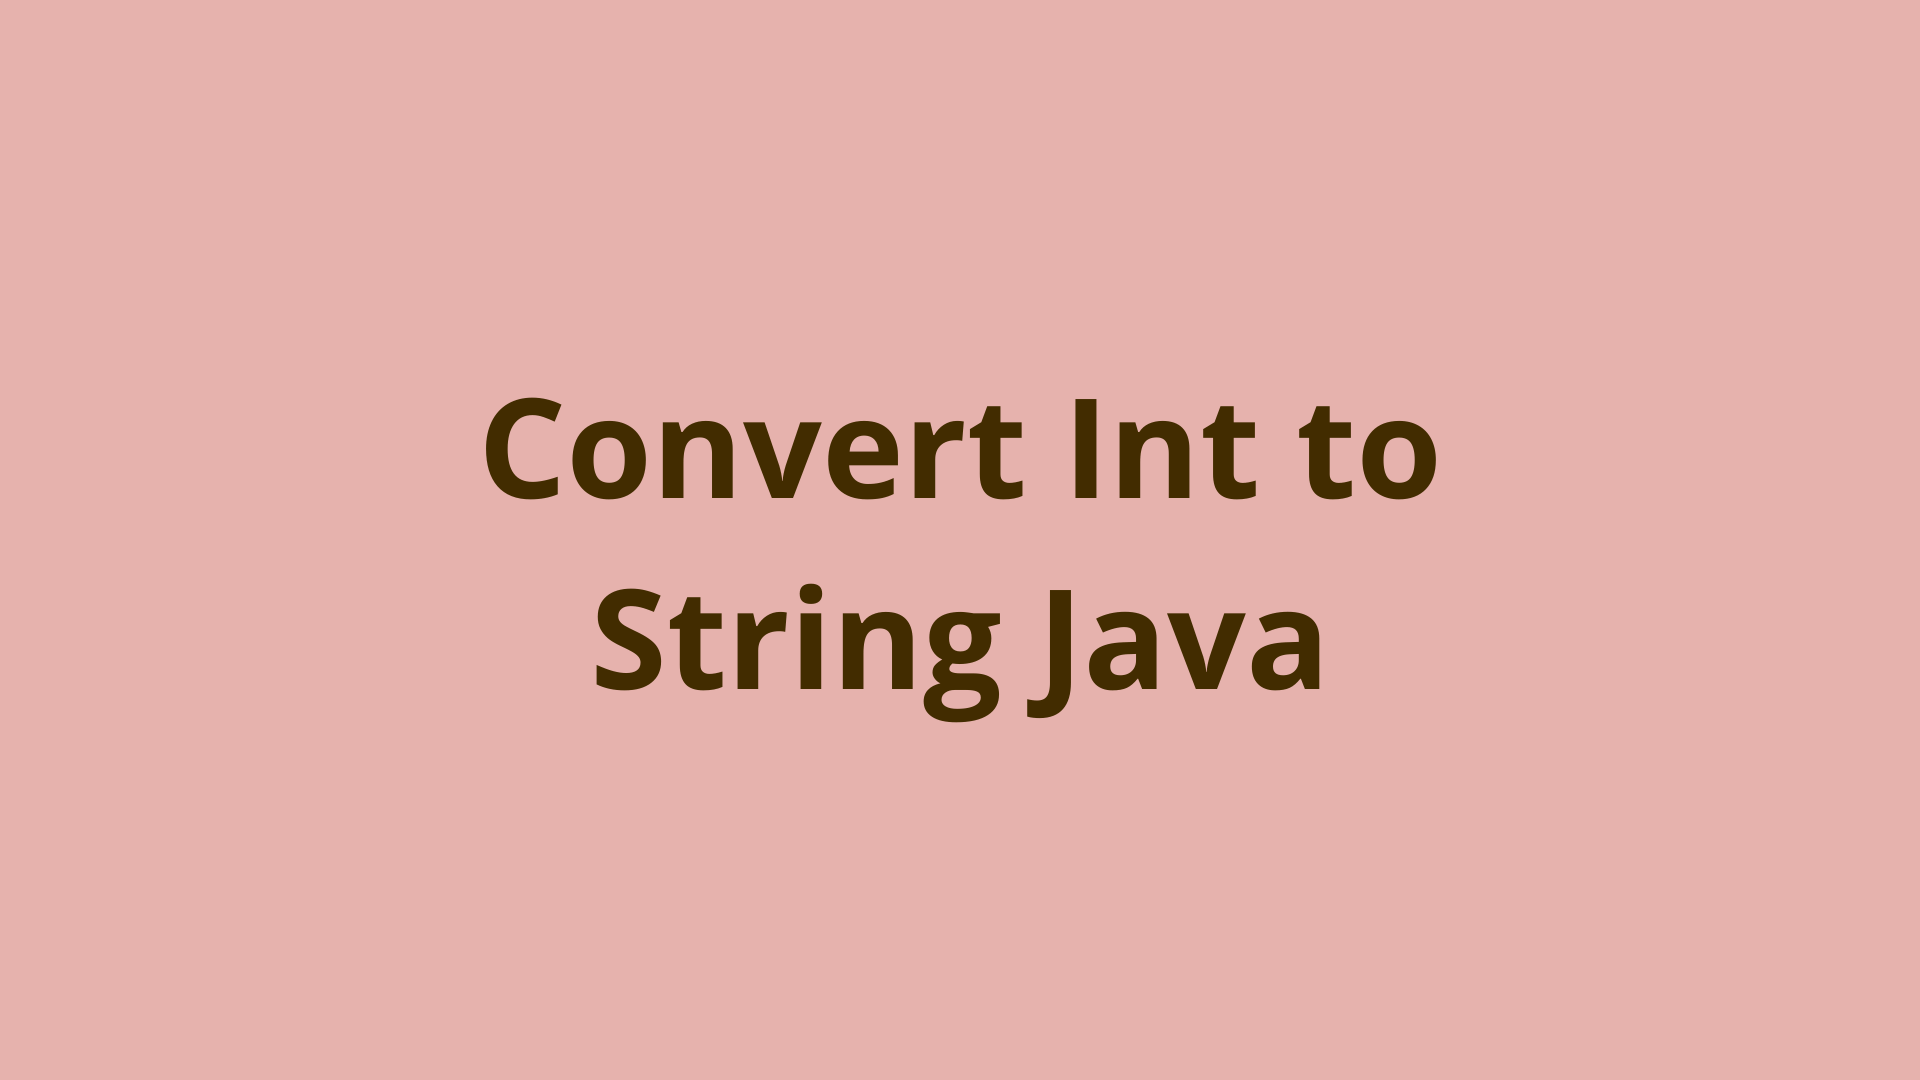 Image of Convert Int to String Java